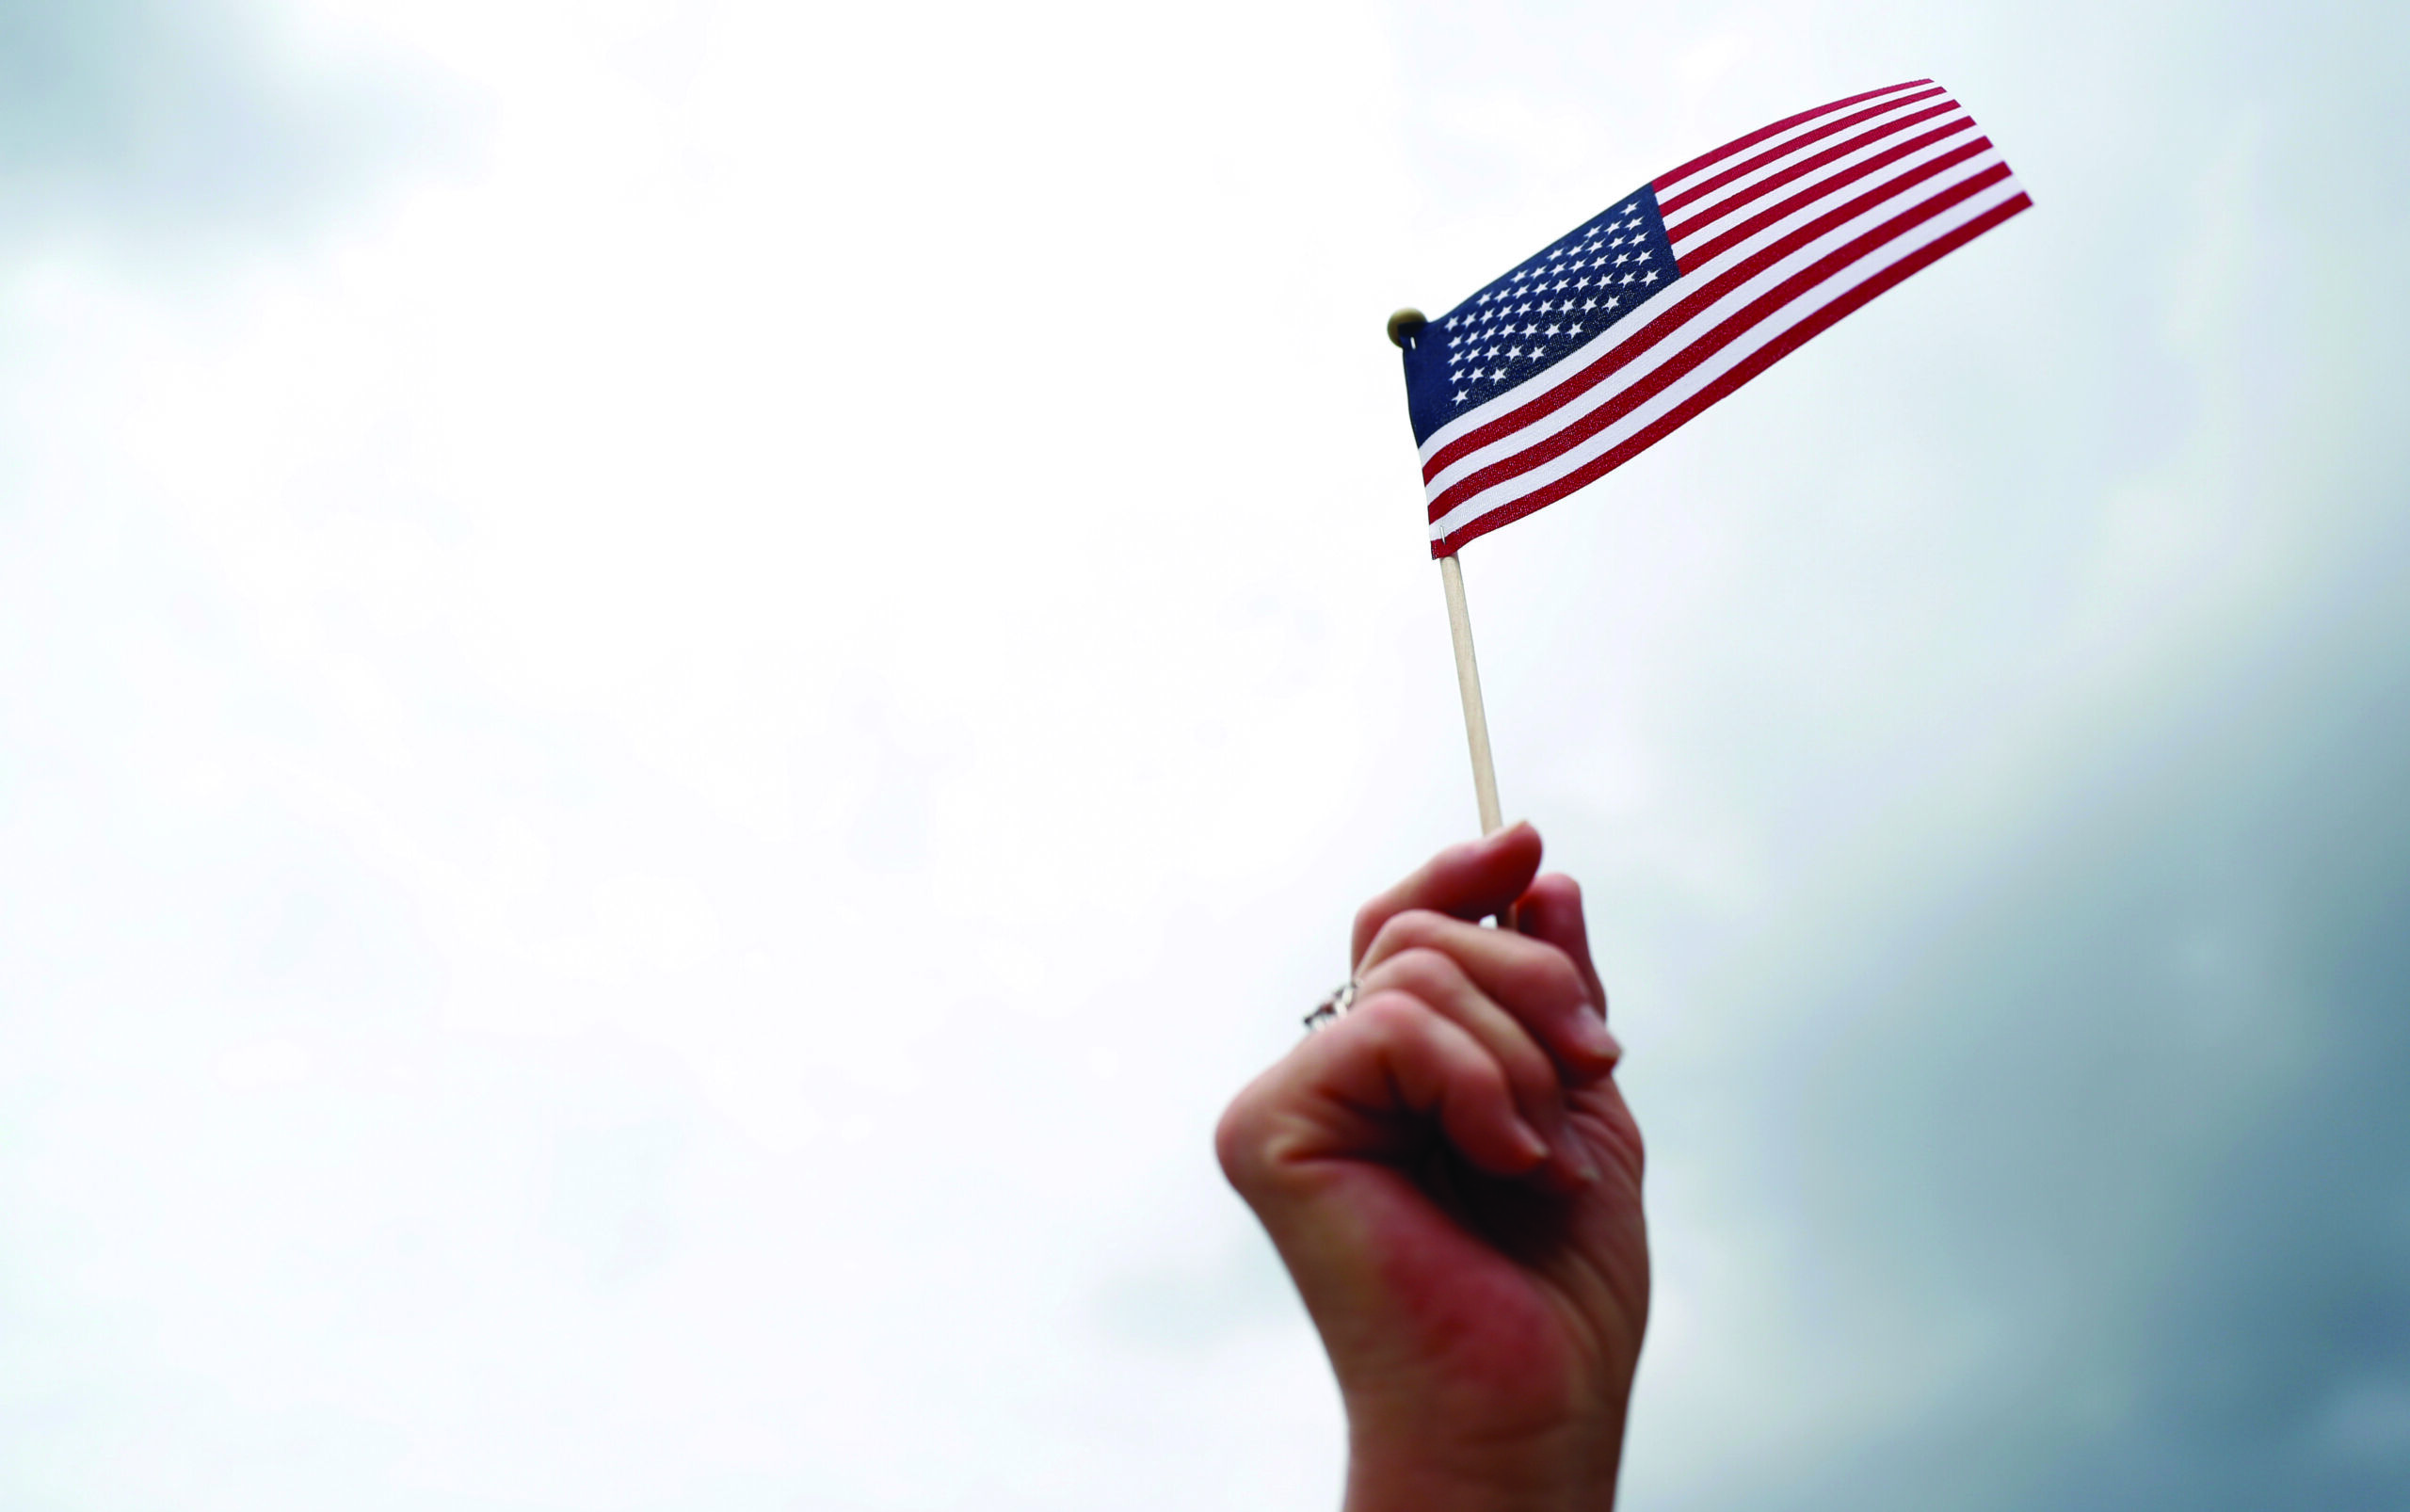 A hand holds a small American flag against the backdrop of a cloudy sky.